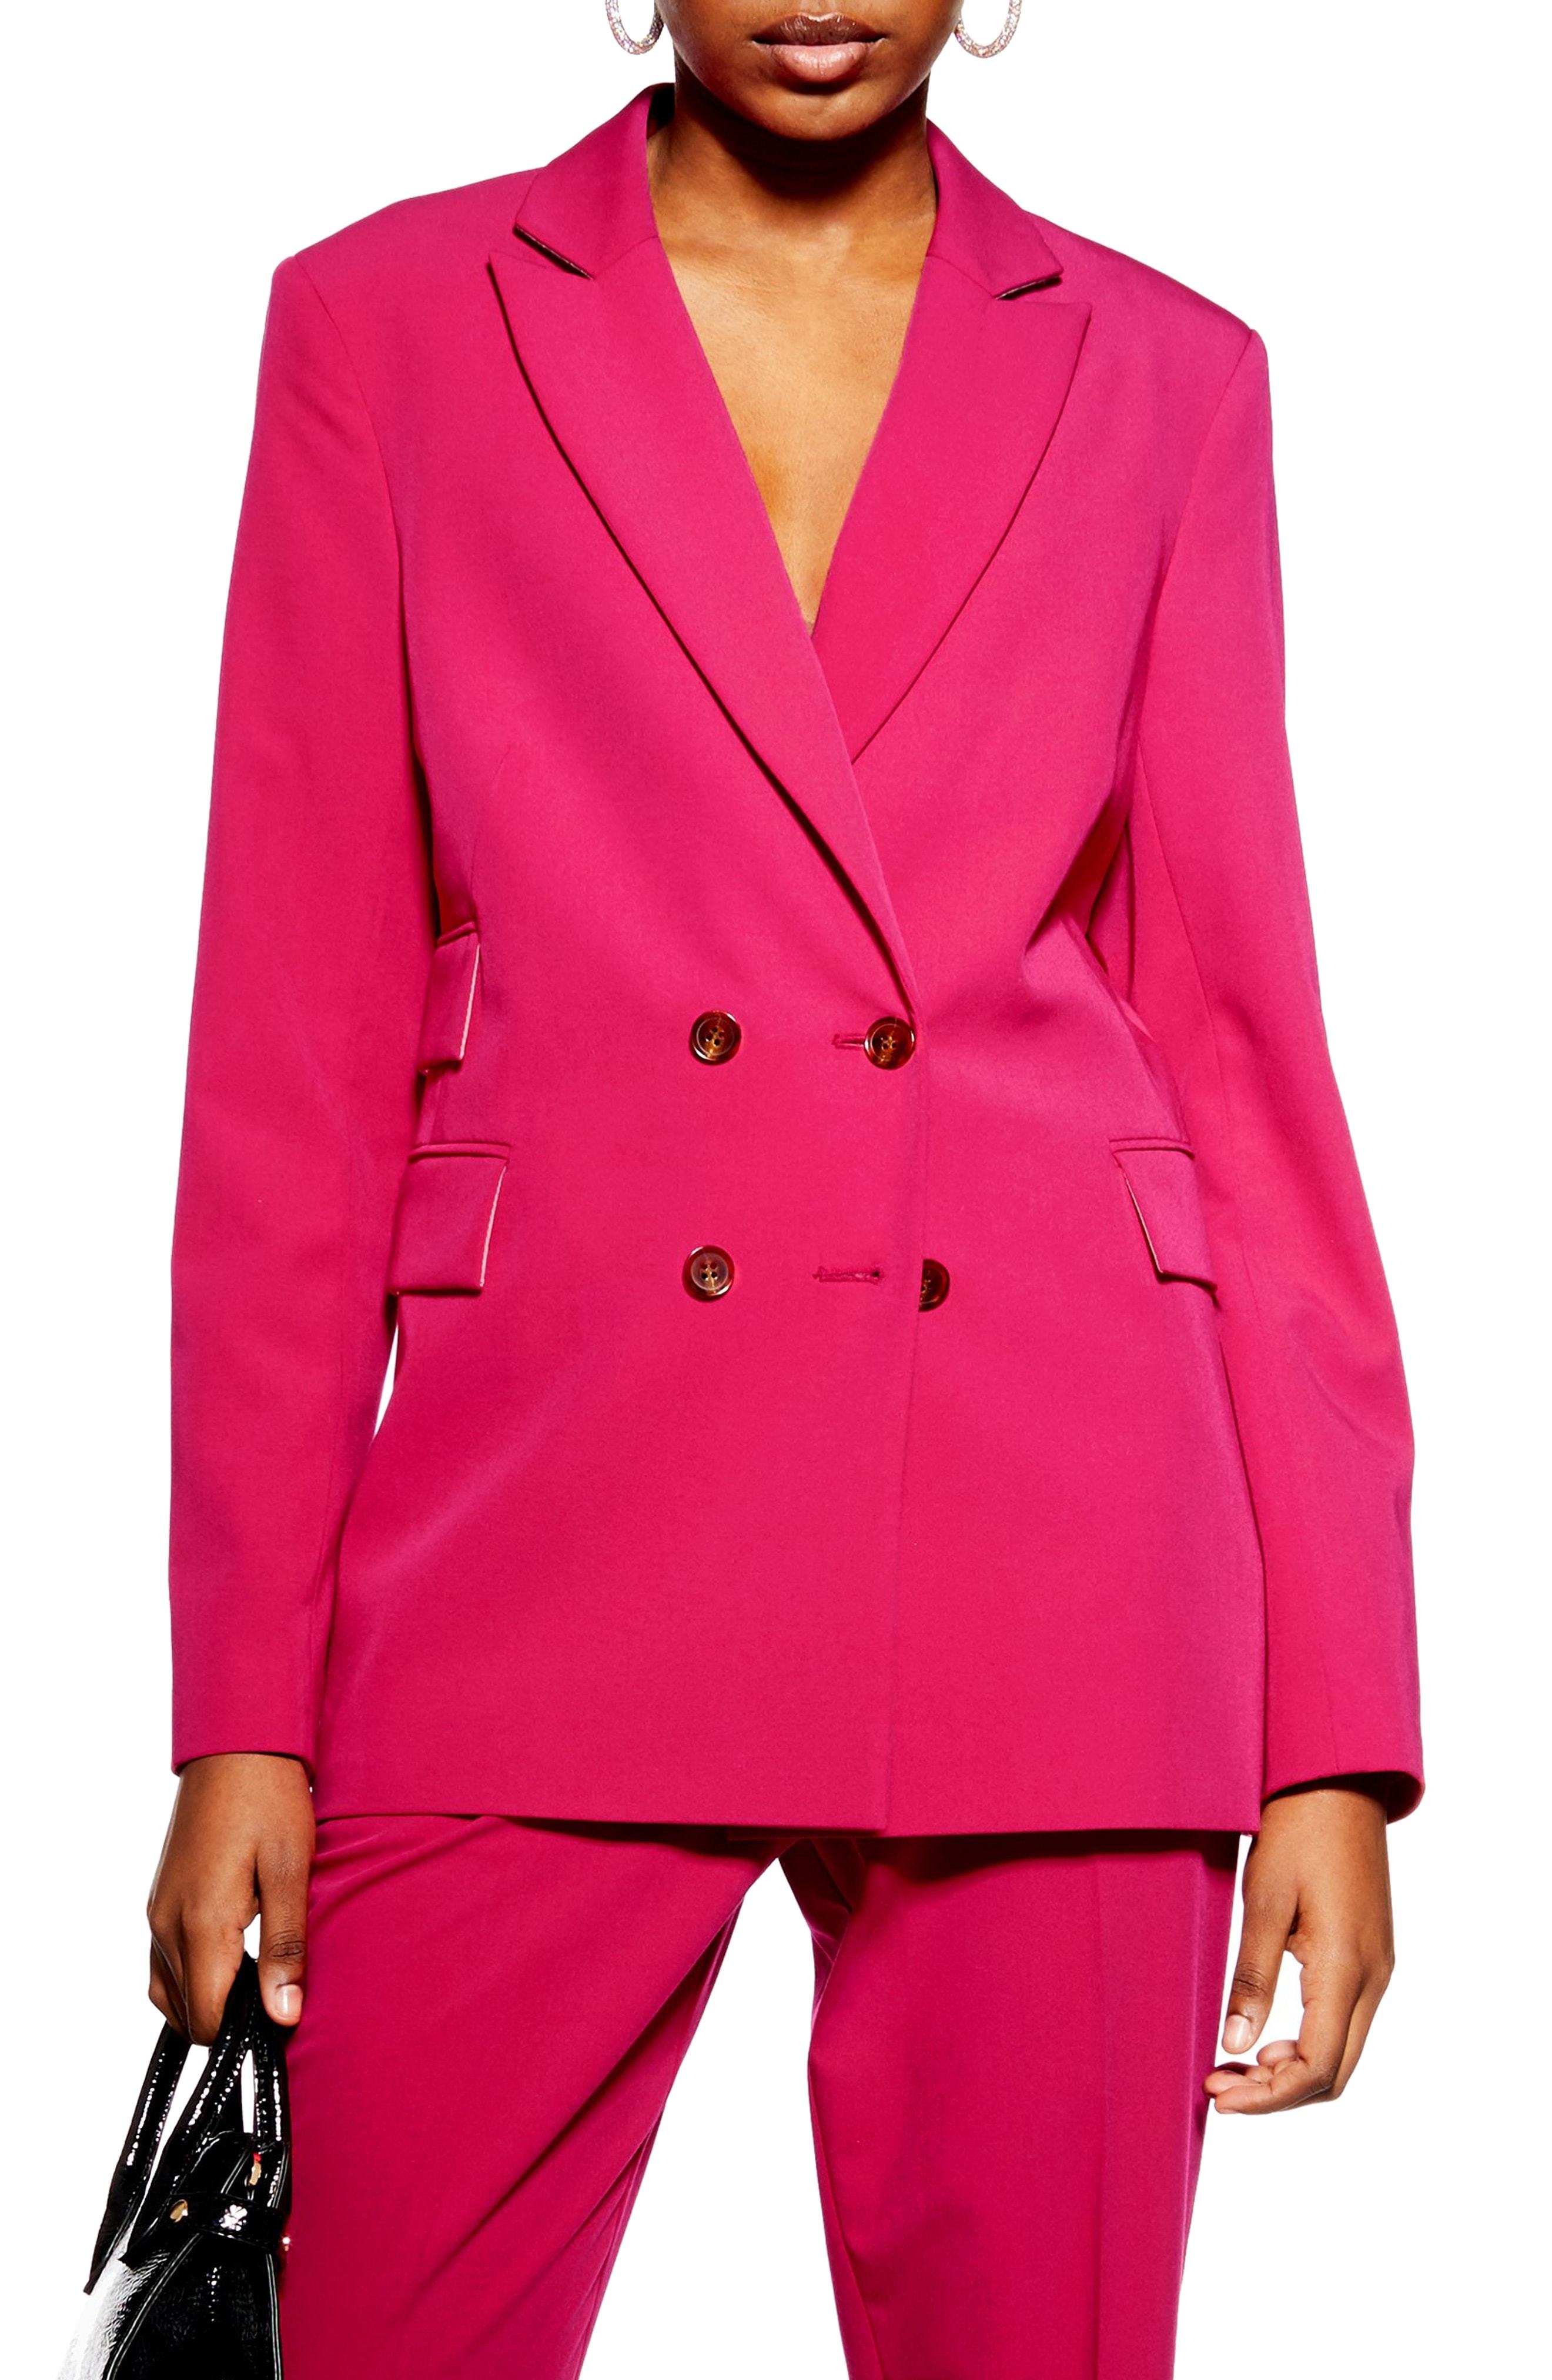 Topshop Double Breasted Jacket, $95, Nordstrom